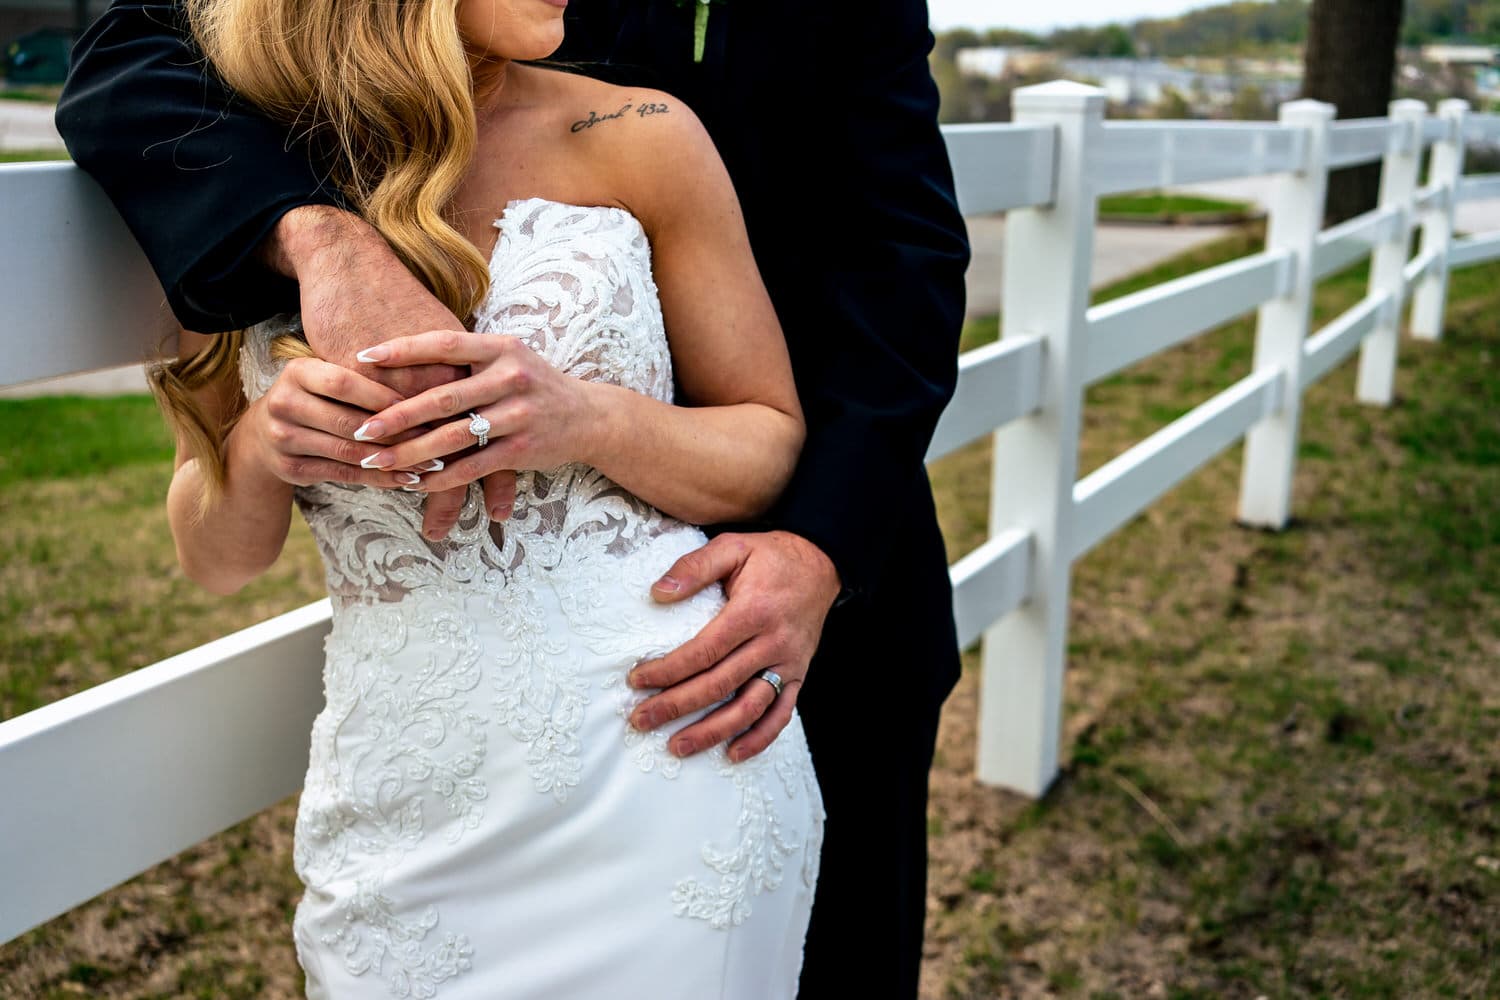 A close-up picture of a bride holding her groom's hand, his other hand visible on her waist. 